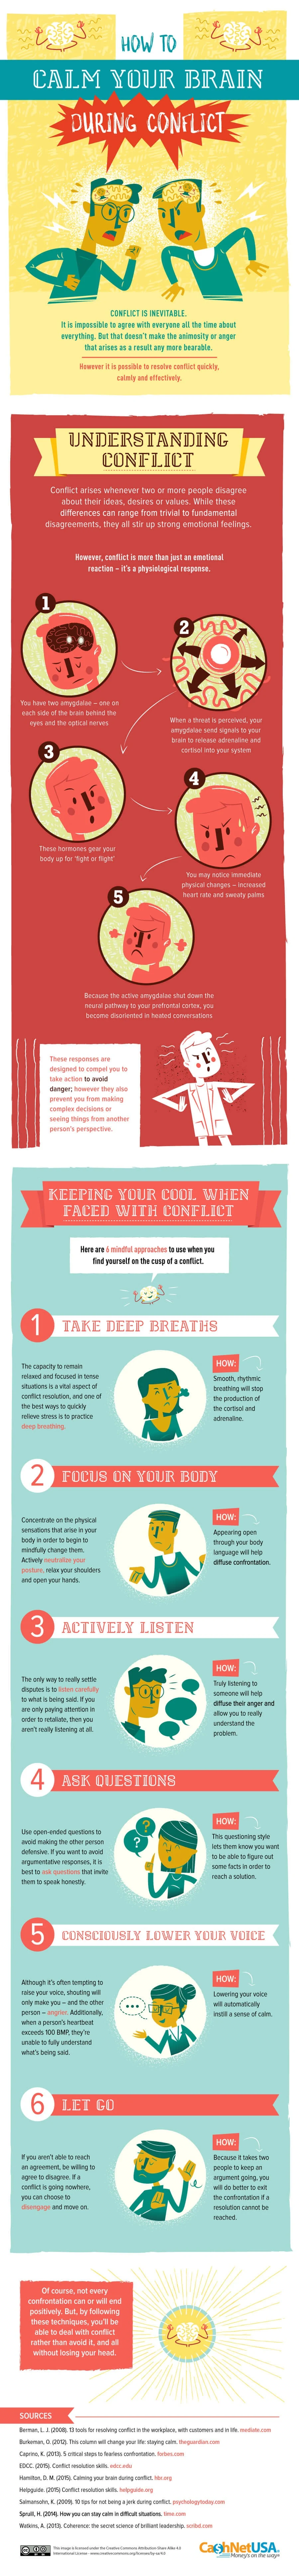 How to Calm Your Brain During Conflict - #infographic